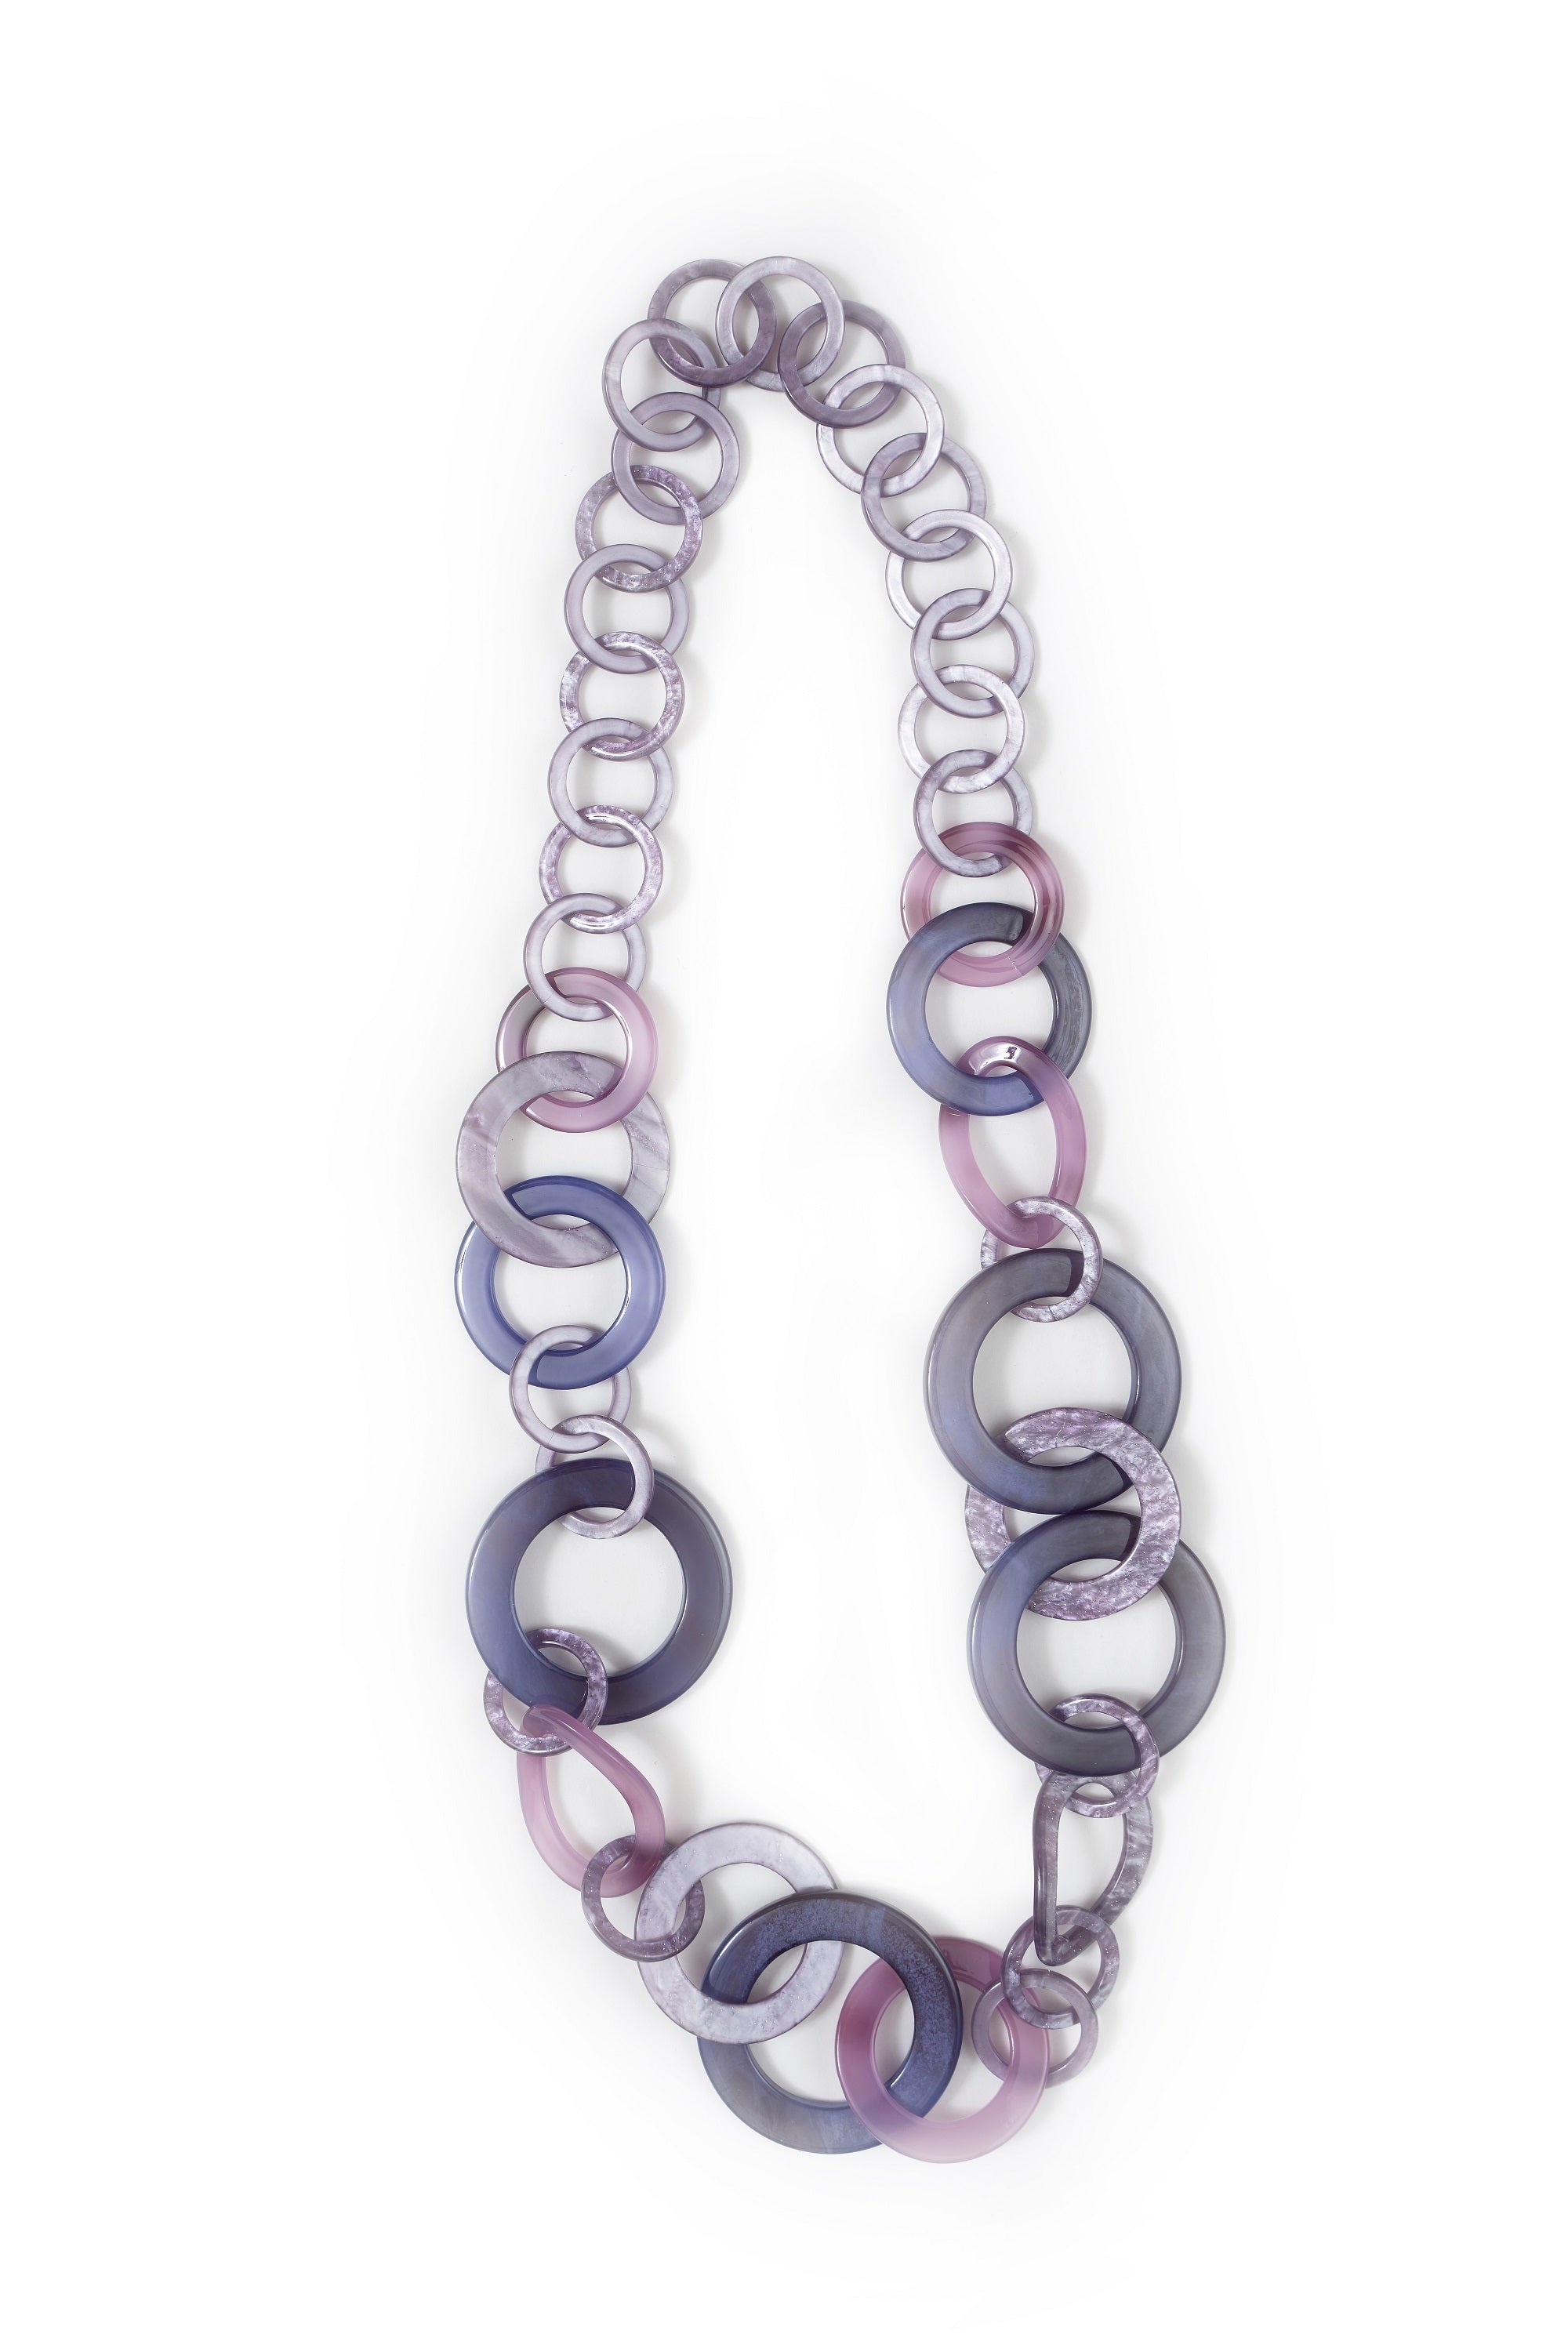 Chain Link Resin Necklace